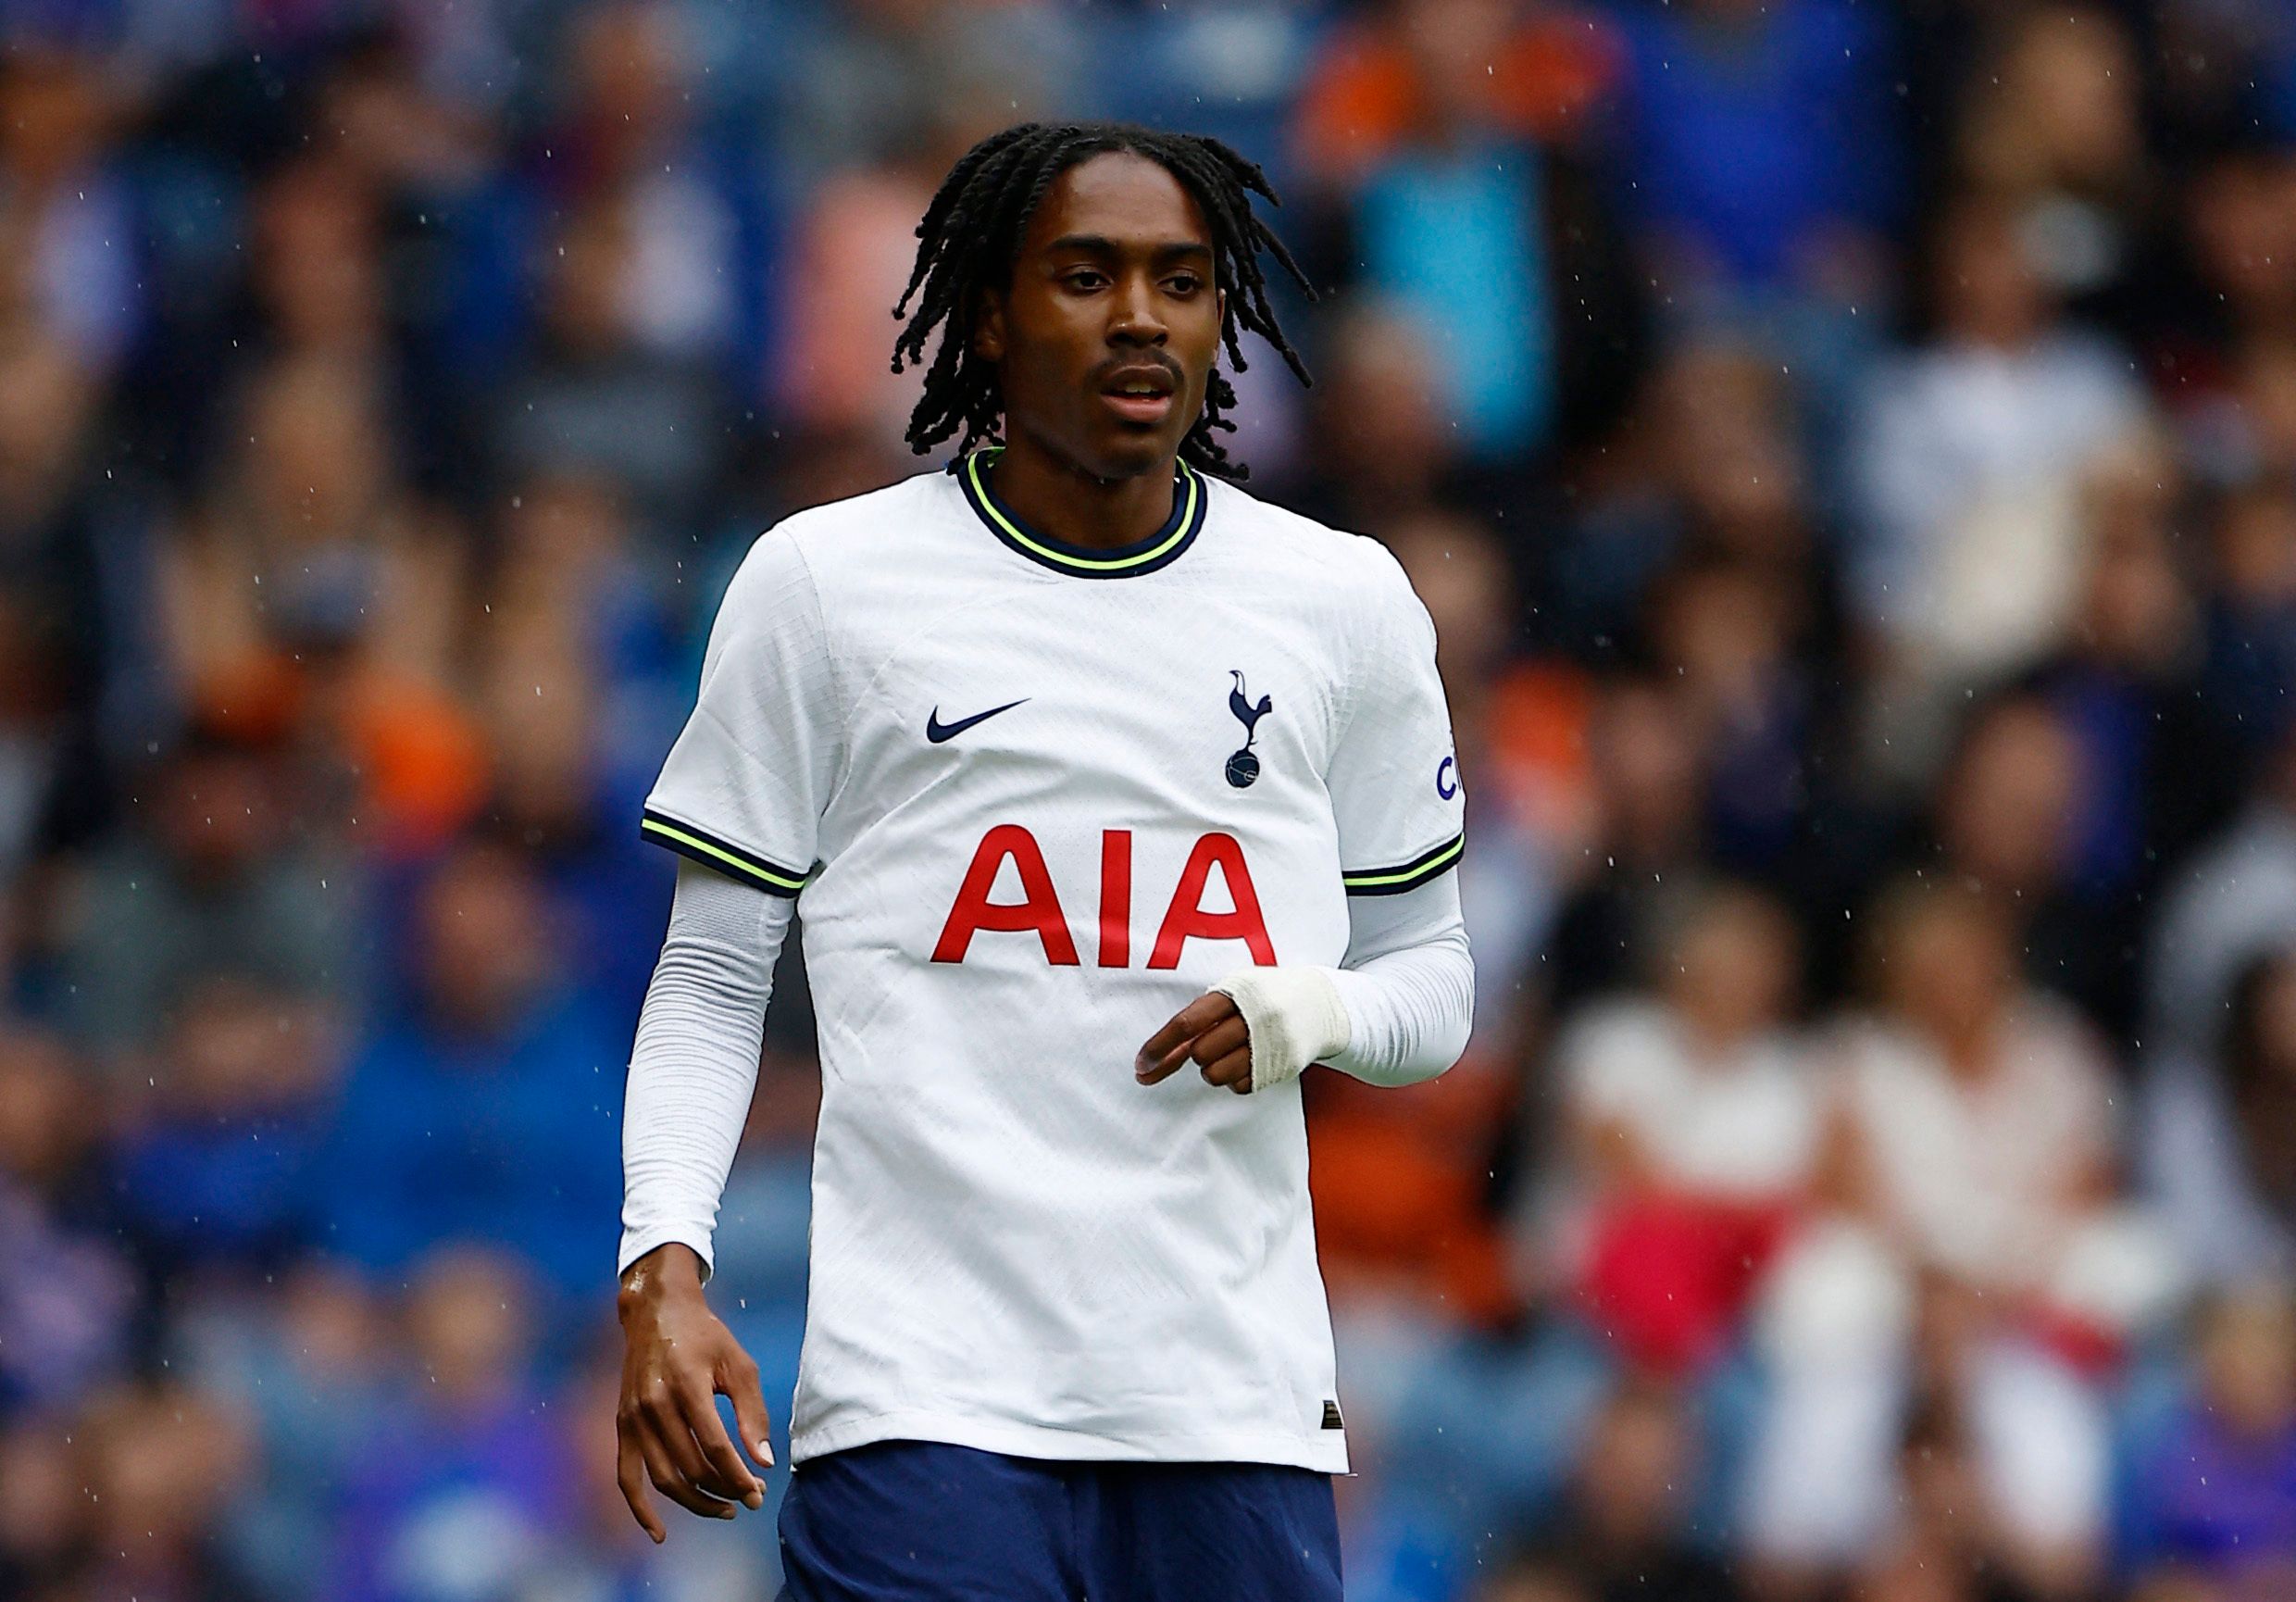 Tottenham: Djed Spence may be forced to go out on loan to get his chance -Follow up